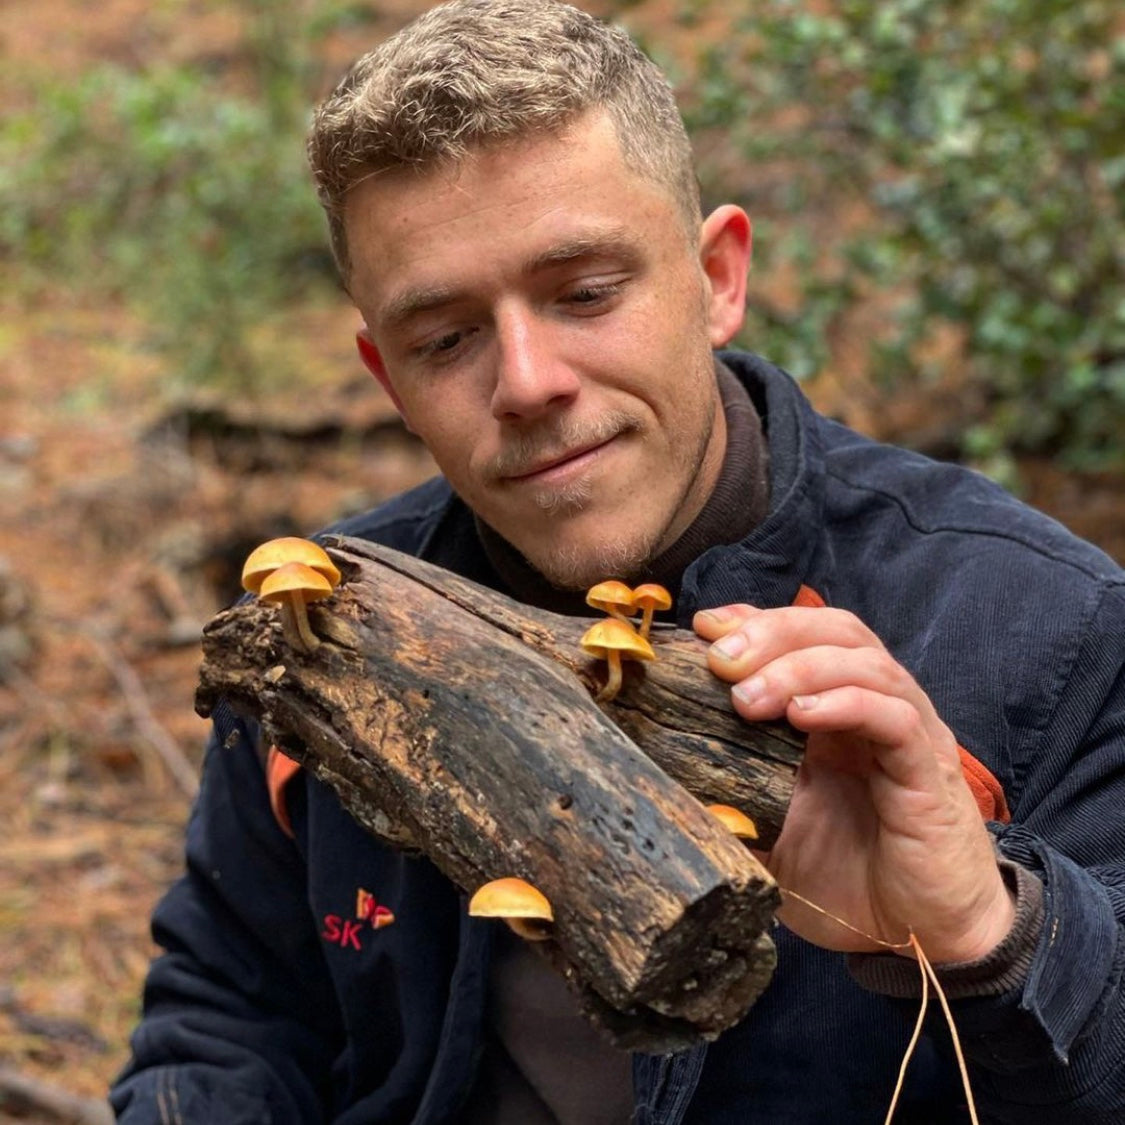 Learn to identify mushrooms in South Africa with our mushroom identification workshops! Our workshops are led by experienced mycologists and will teach you everything you need to know to safely identify and enjoy the diverse range of mushrooms in our country. Sign up for a workshop today and start exploring the world of mushrooms! 